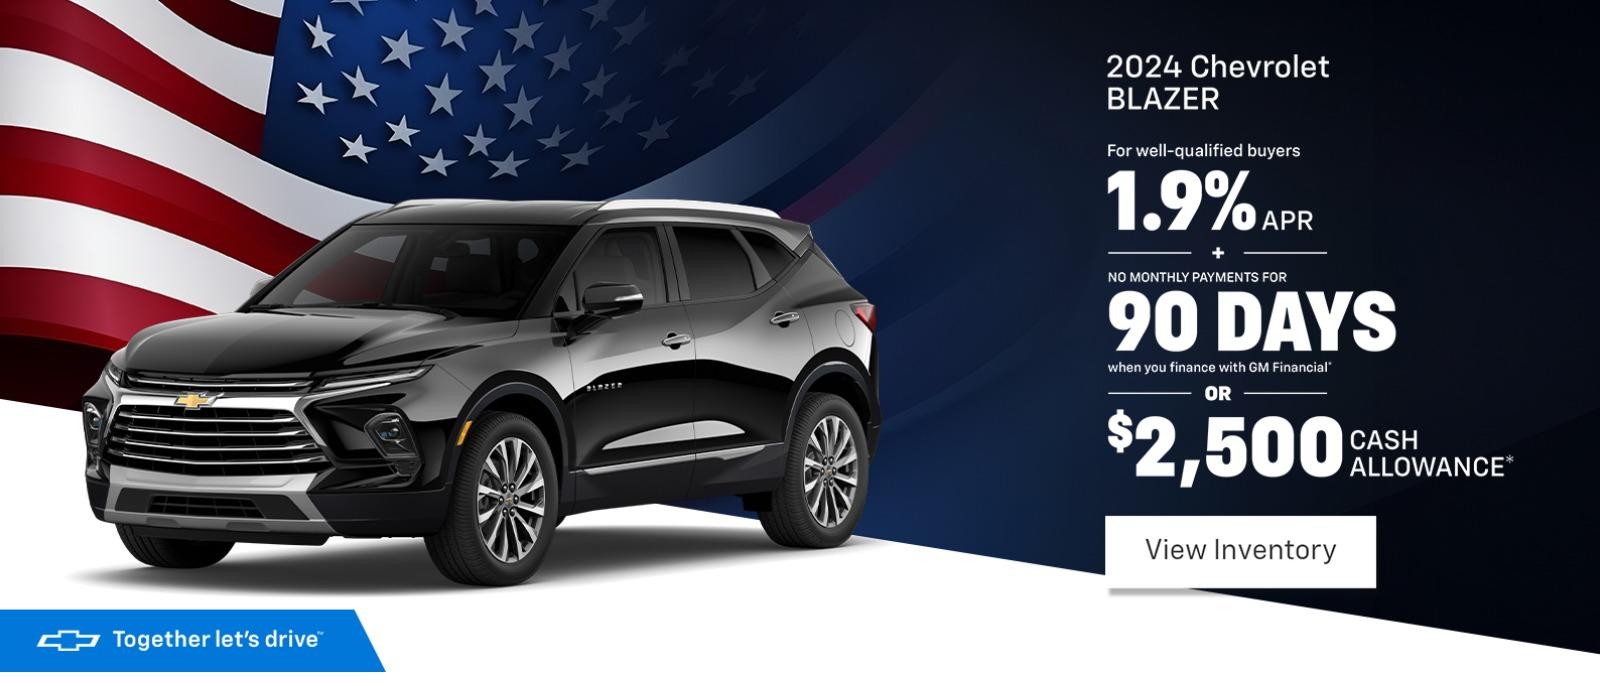 2024 Chevrolet BLAZER For well-qualified buyers 1.9% APR NO MONTHLY PAYMENTS FOR 90 DAYS when you finance with GM Financial OR $2,500 CASH ALLOWANCE*